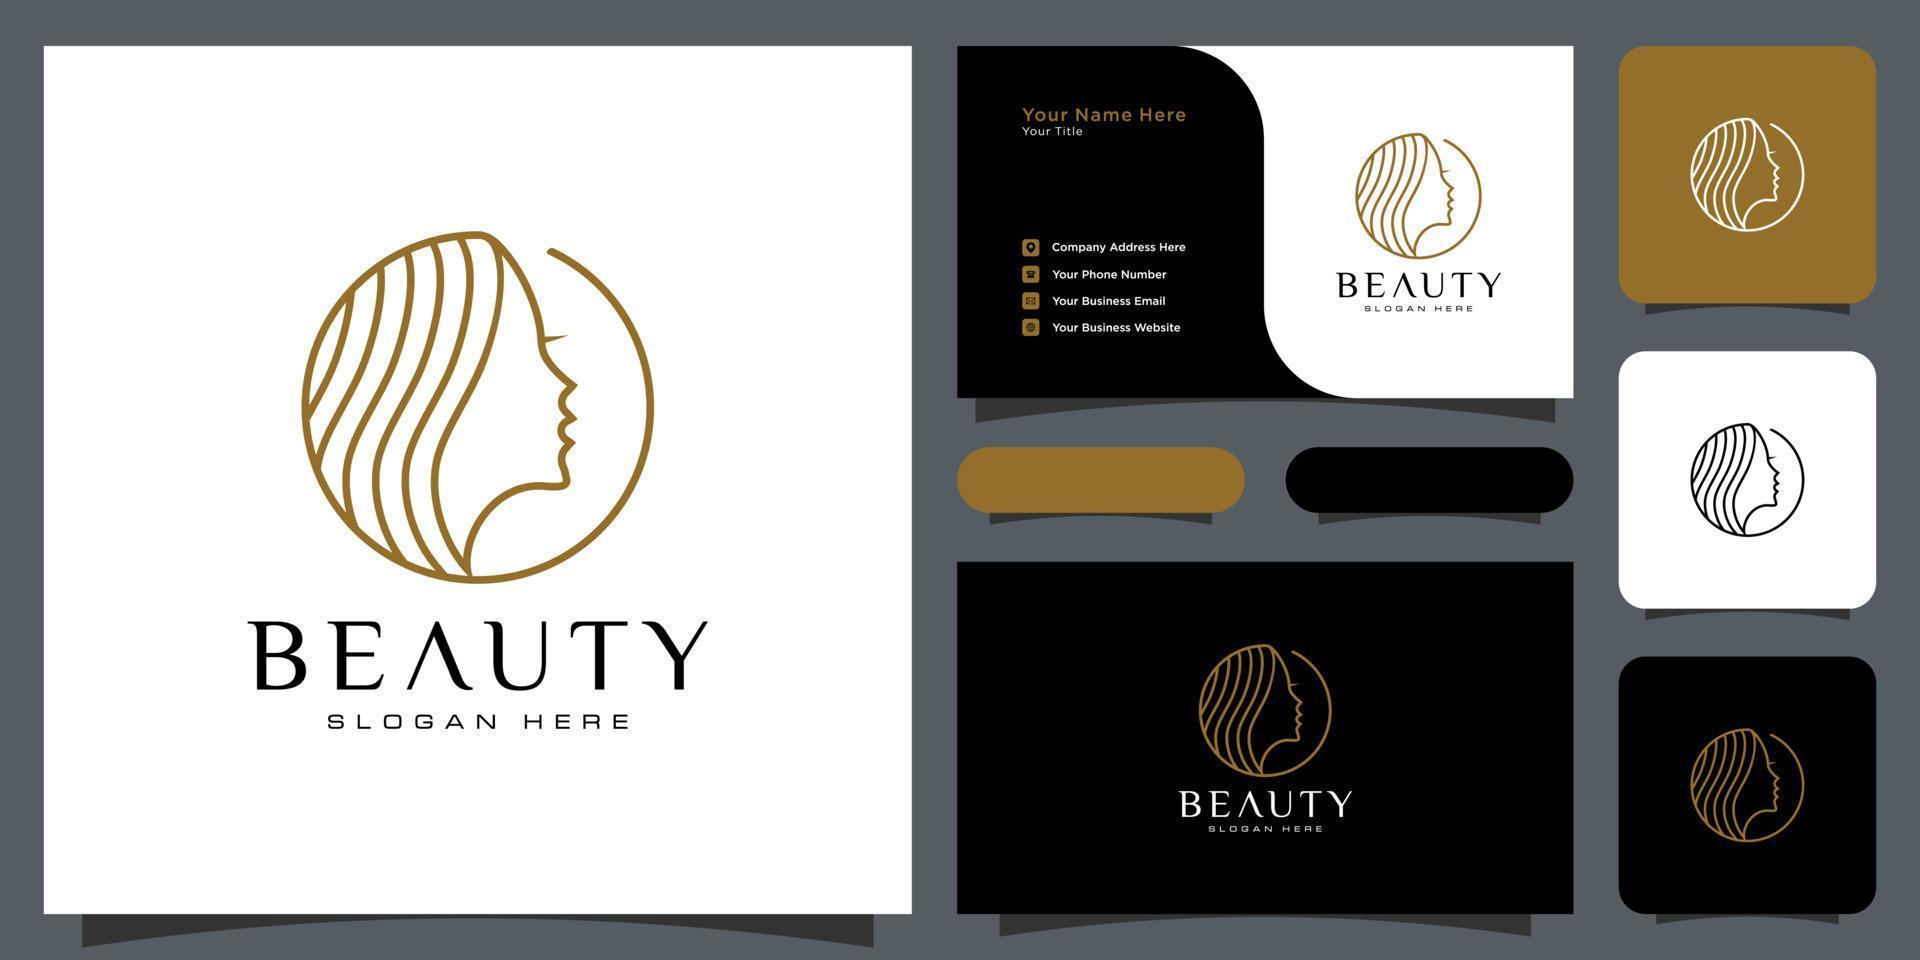 Beauty woman hairstyle logo design with business card for nature people salon elements vector